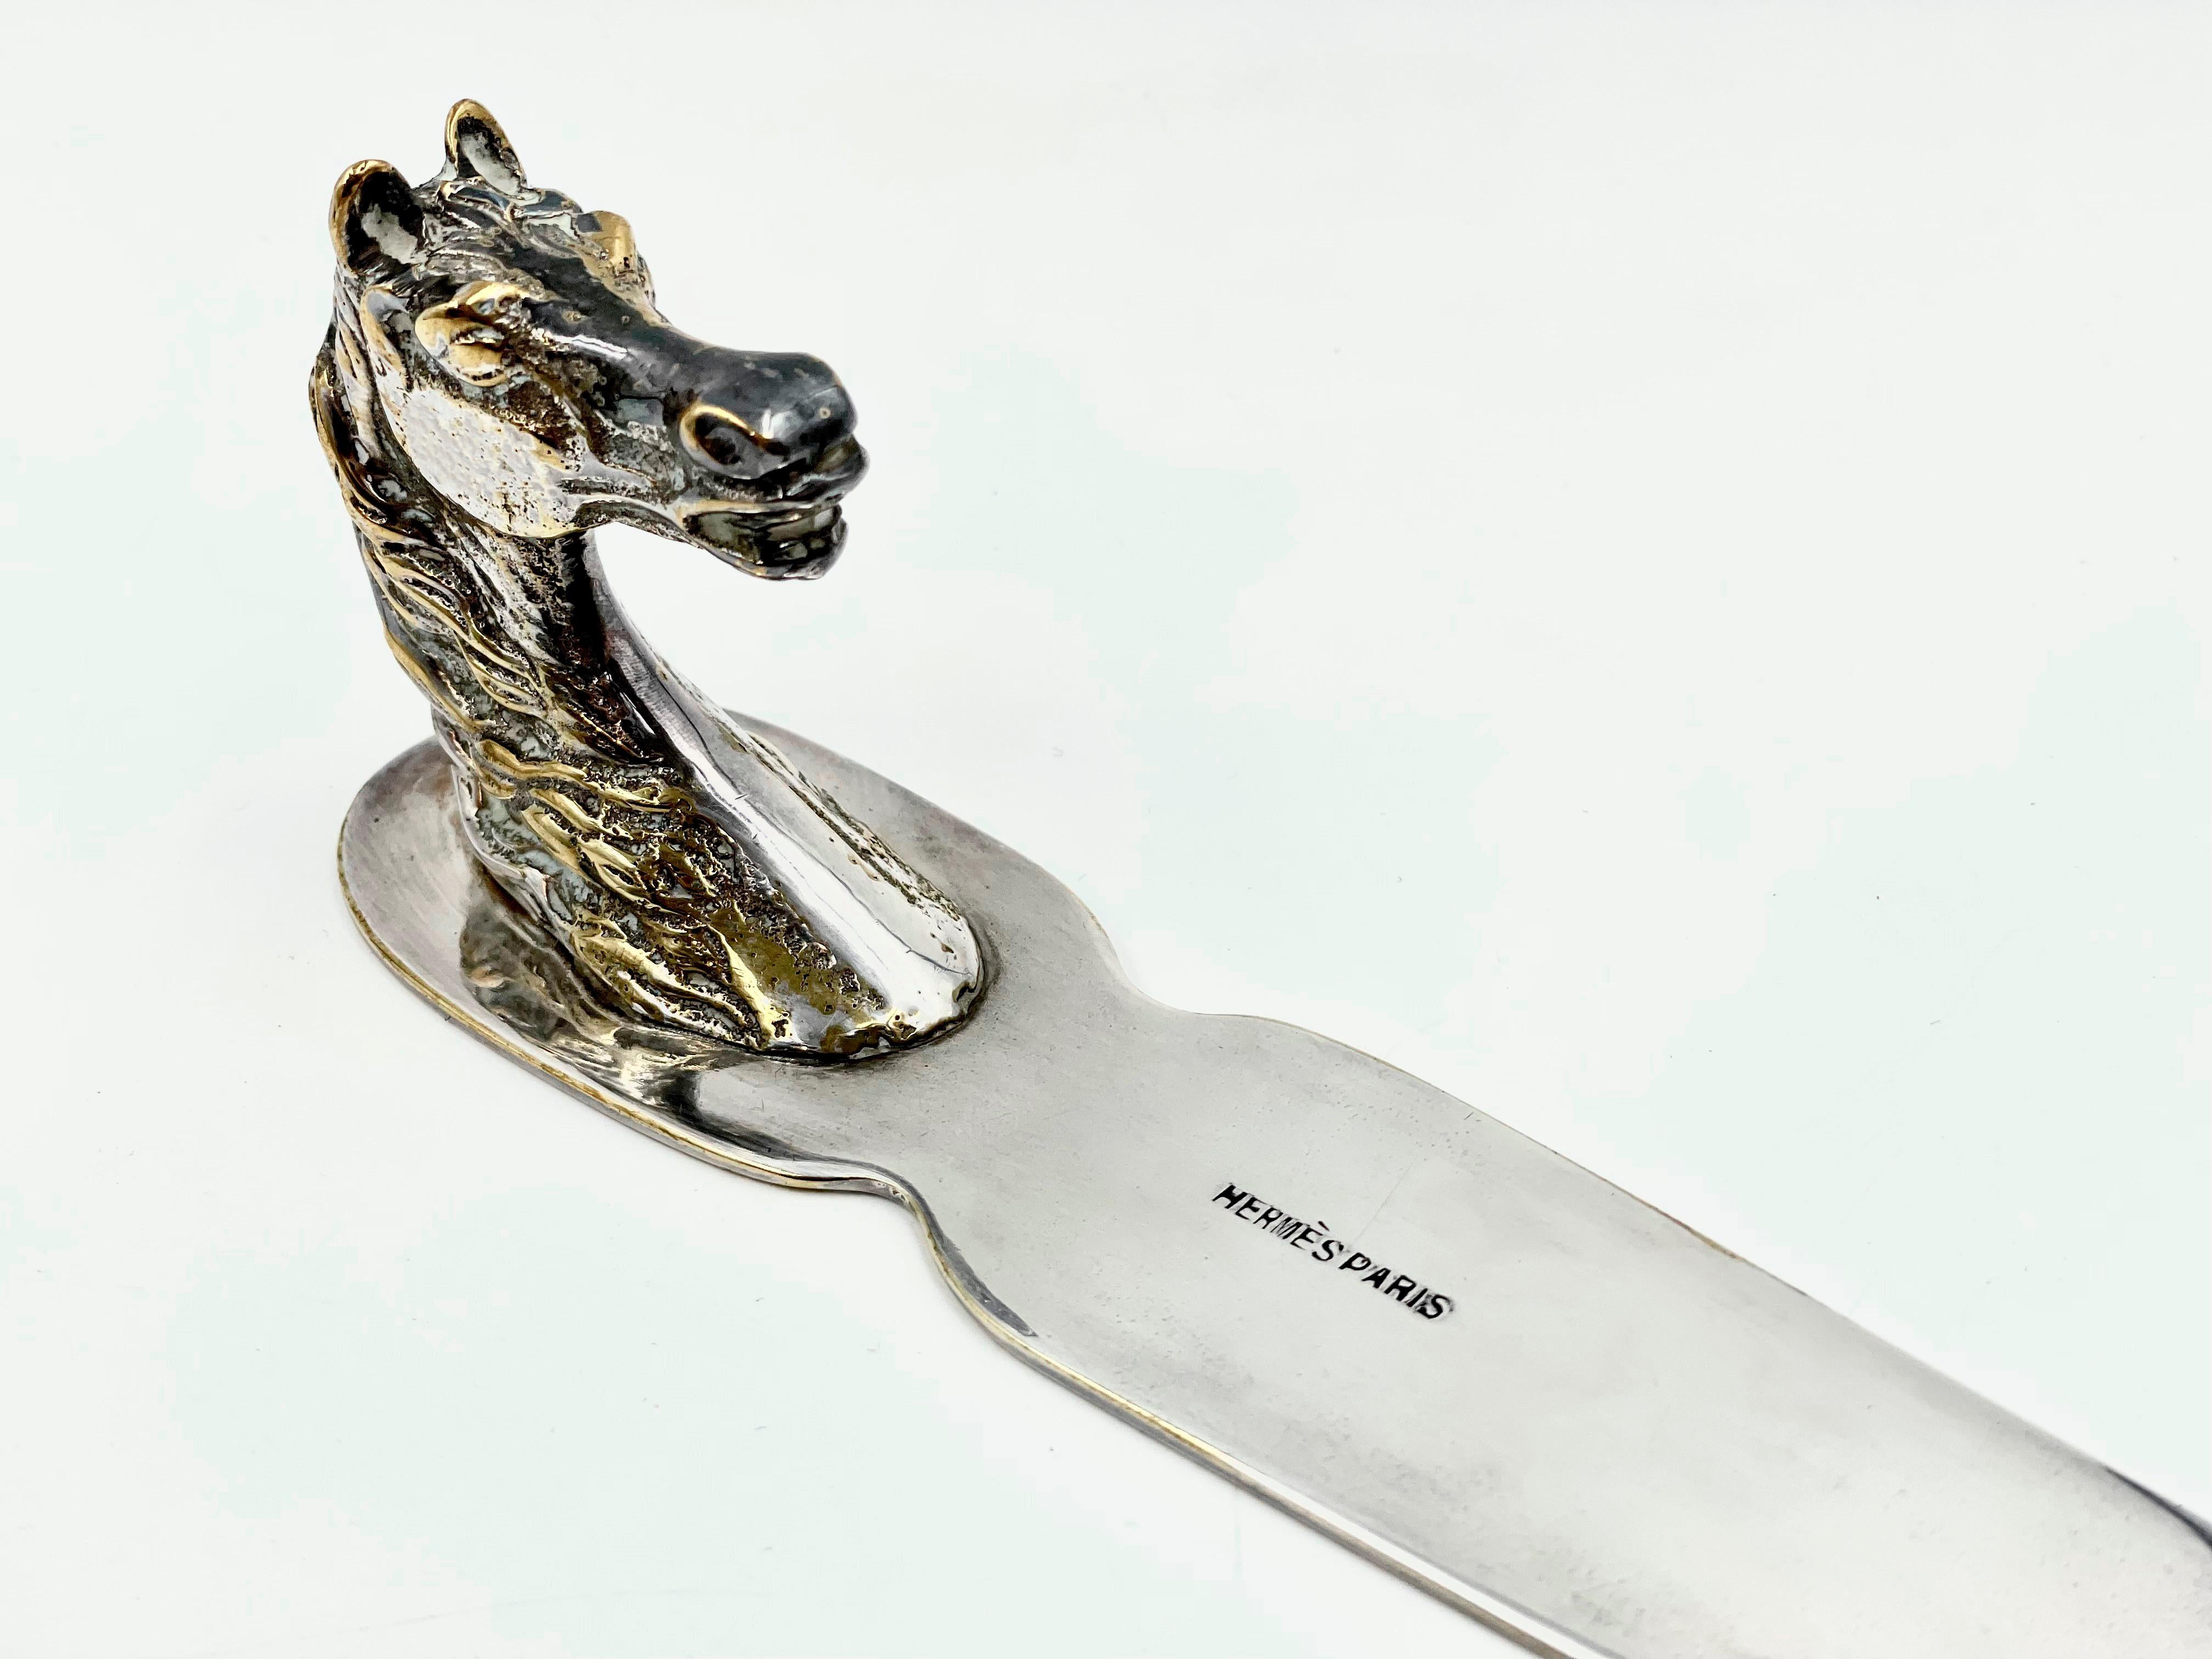 Elegant Hermès letter opener with a detailed horse head handle in solid metal.Beautiful light patina to the silver and a blade that tapers gently towards the tip. This piece is a stunning and practical addition to elevate your office. Great piece of